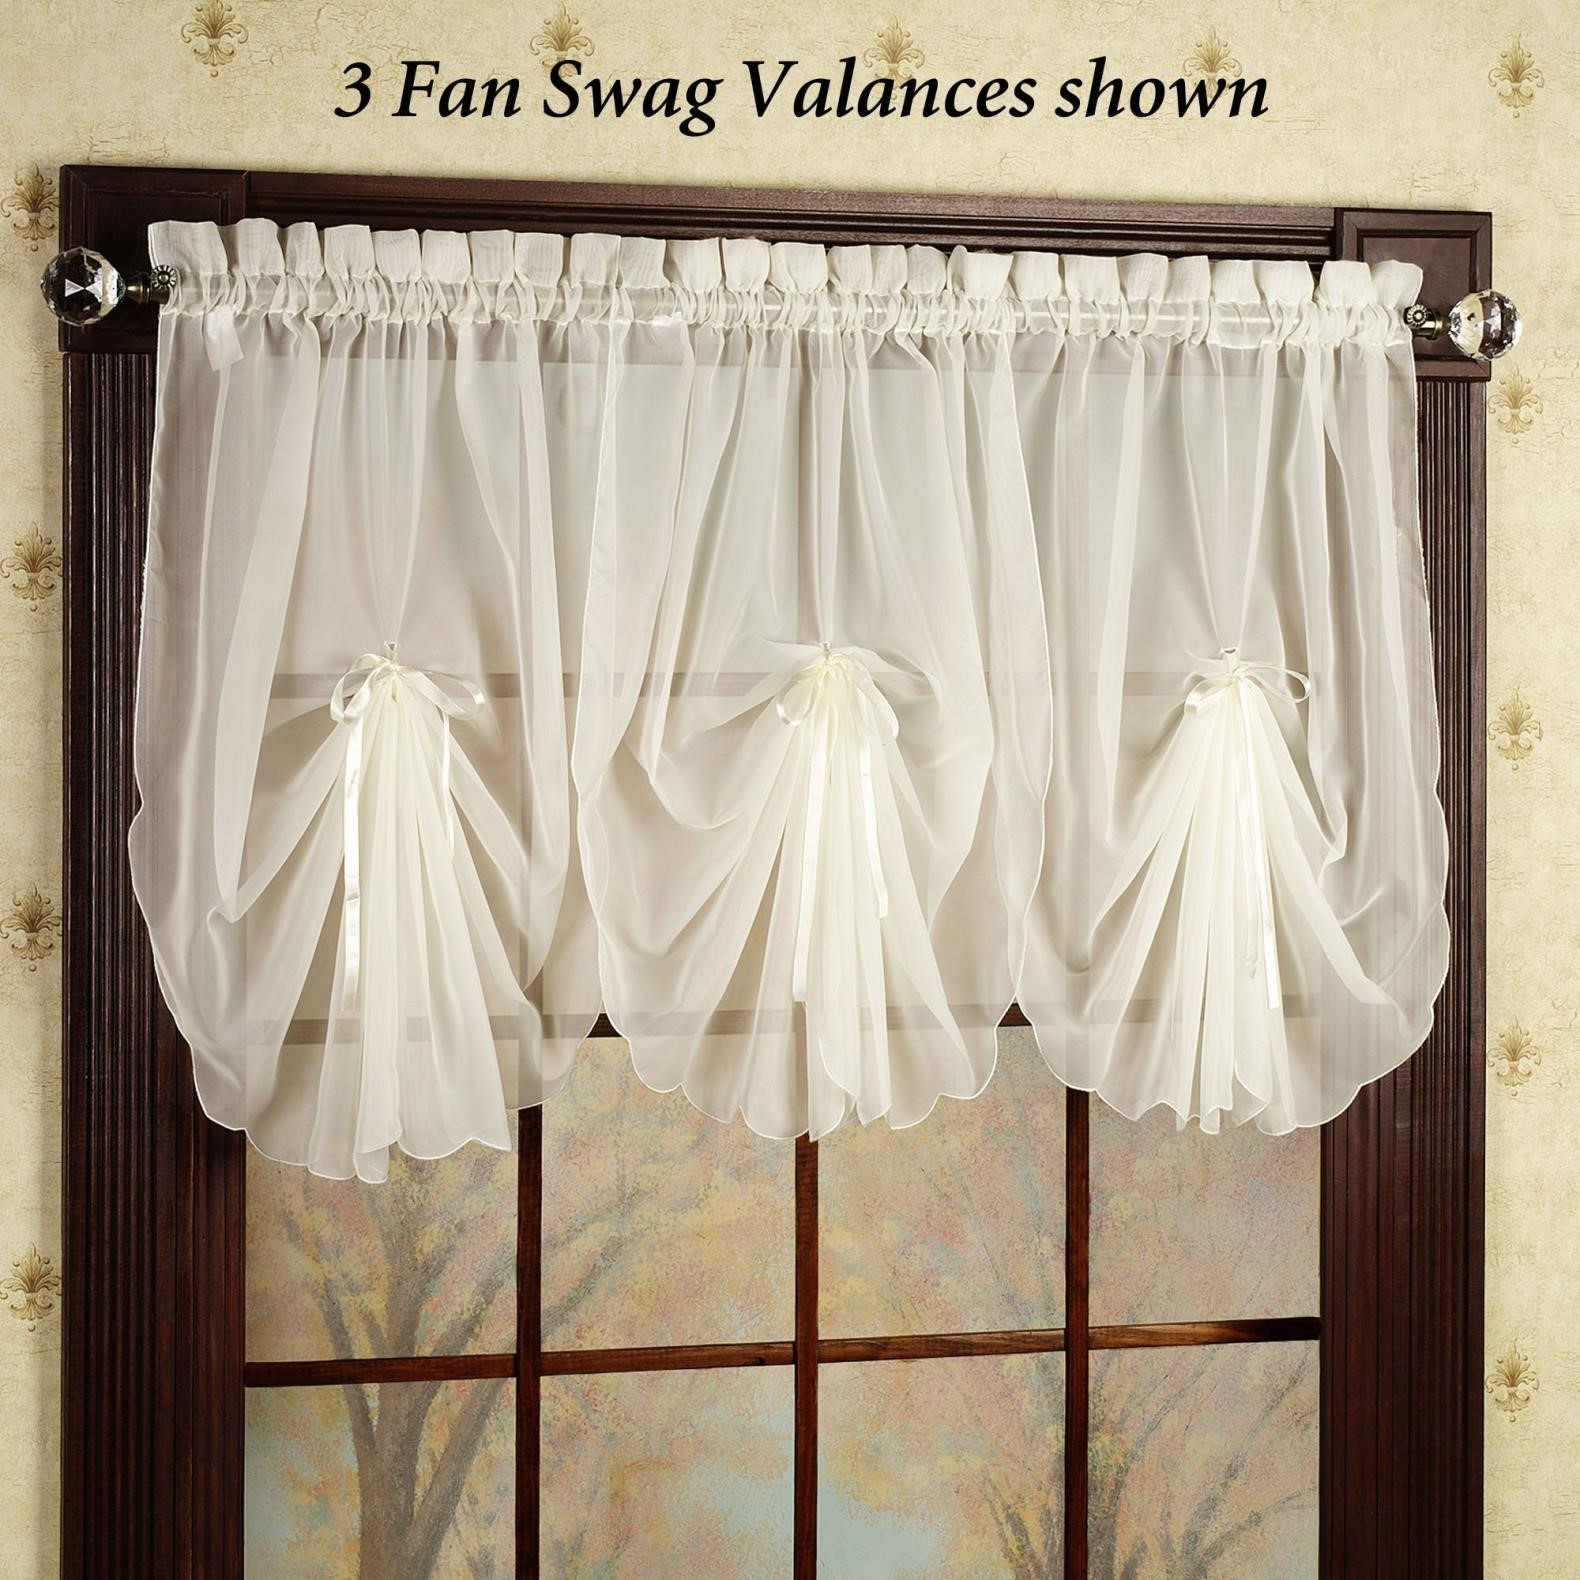 Kitchen Curtains At Jcpenney
 Curtain Adorable Jcpenney Window Curtains For Beautiful